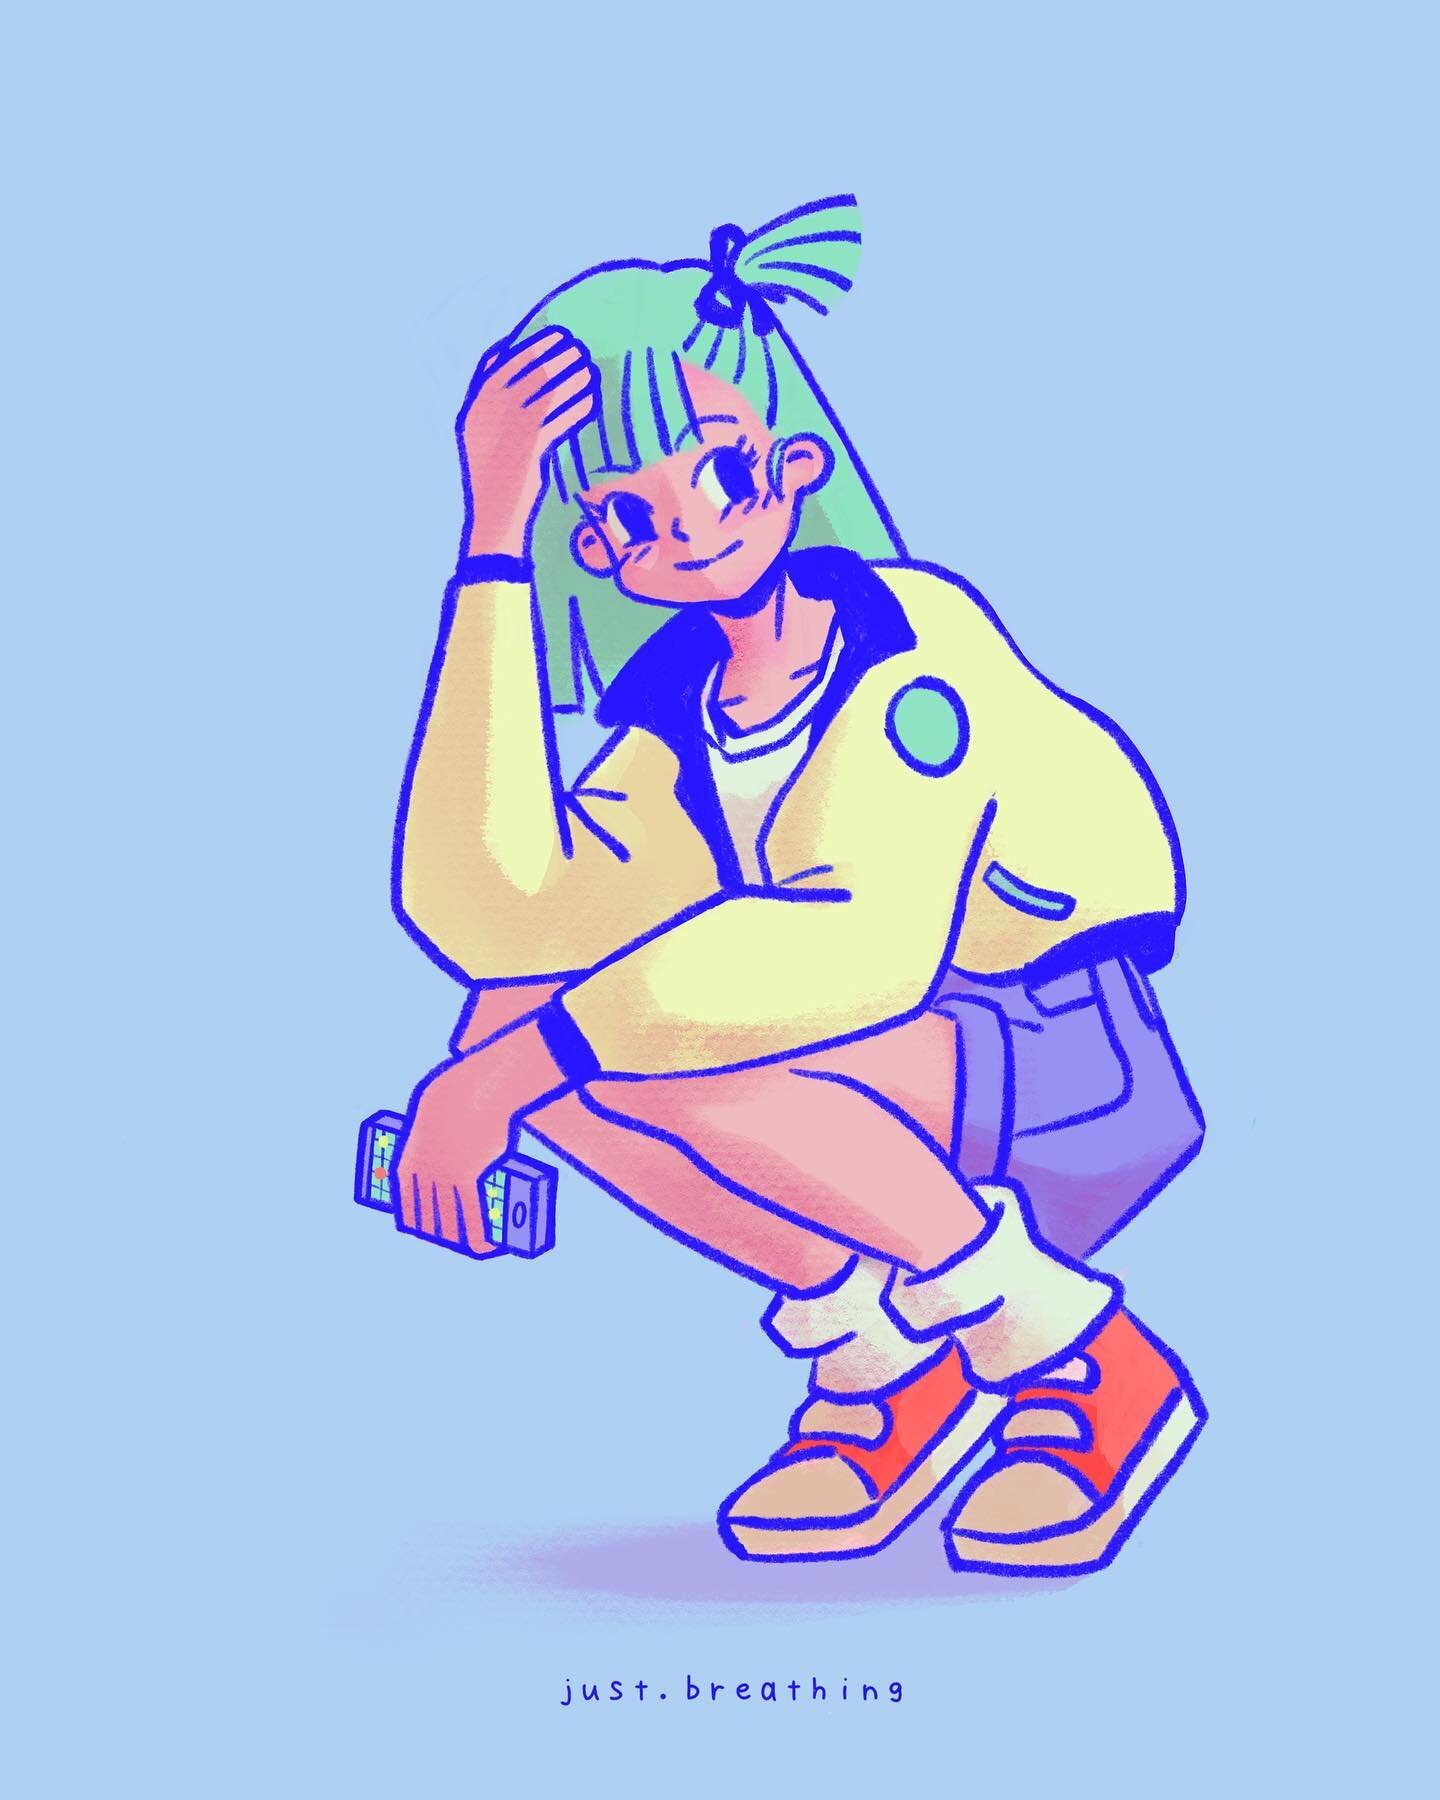 I would like to say that this is a quick warm up sketch I did cause I haven&rsquo;t drawn in a long time and stuff but in reality it took me 3 days to do it so
.
.
.
#drawing #procreate #procreatedrawing #character #bulma #bulmafanart #dragonball #dr